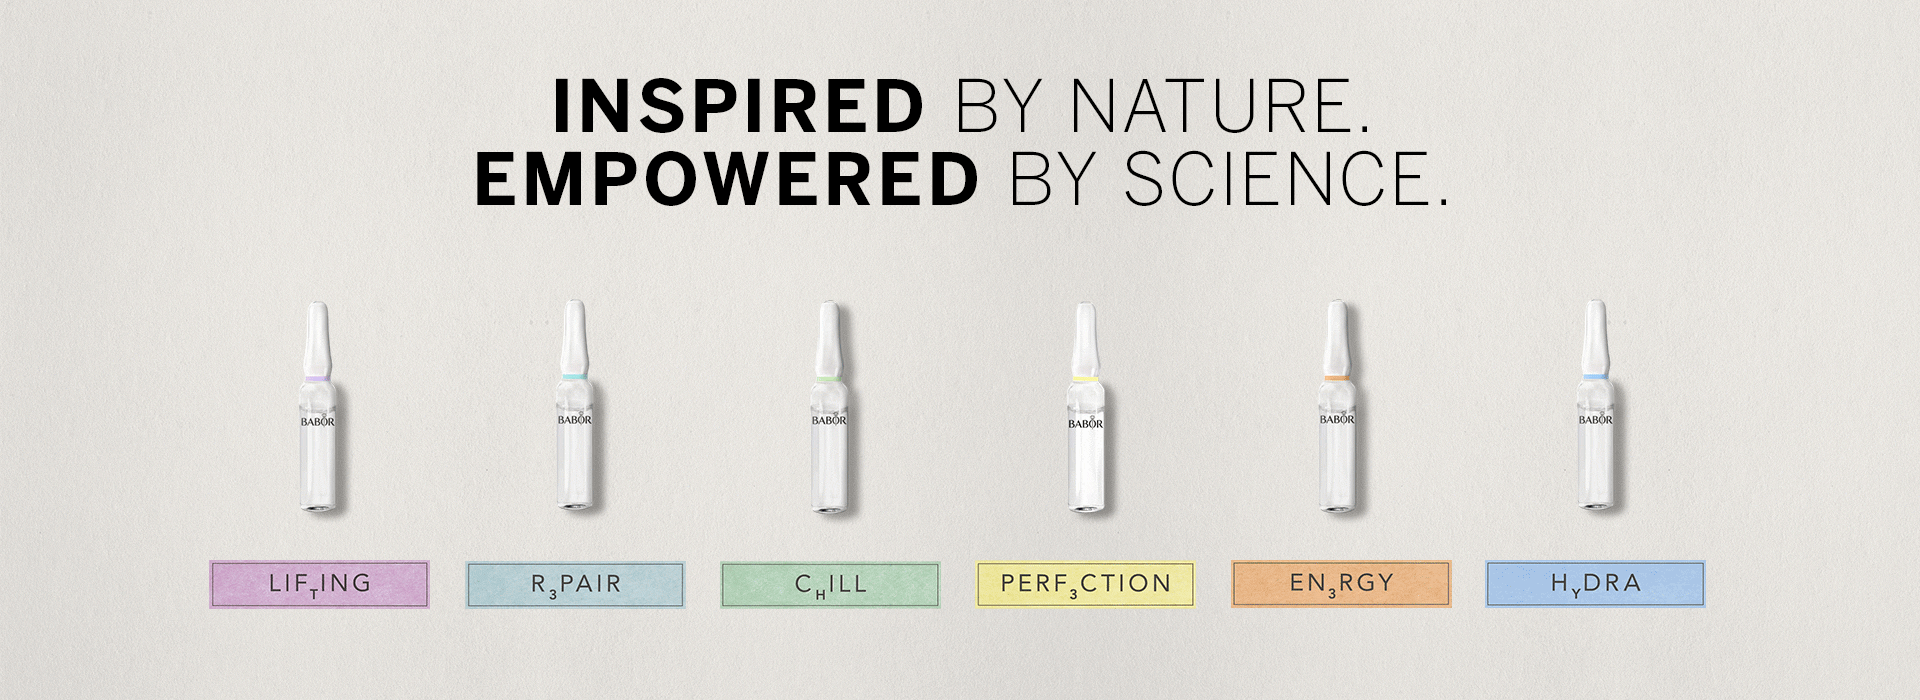 Inspired by nature. Empowered by science.